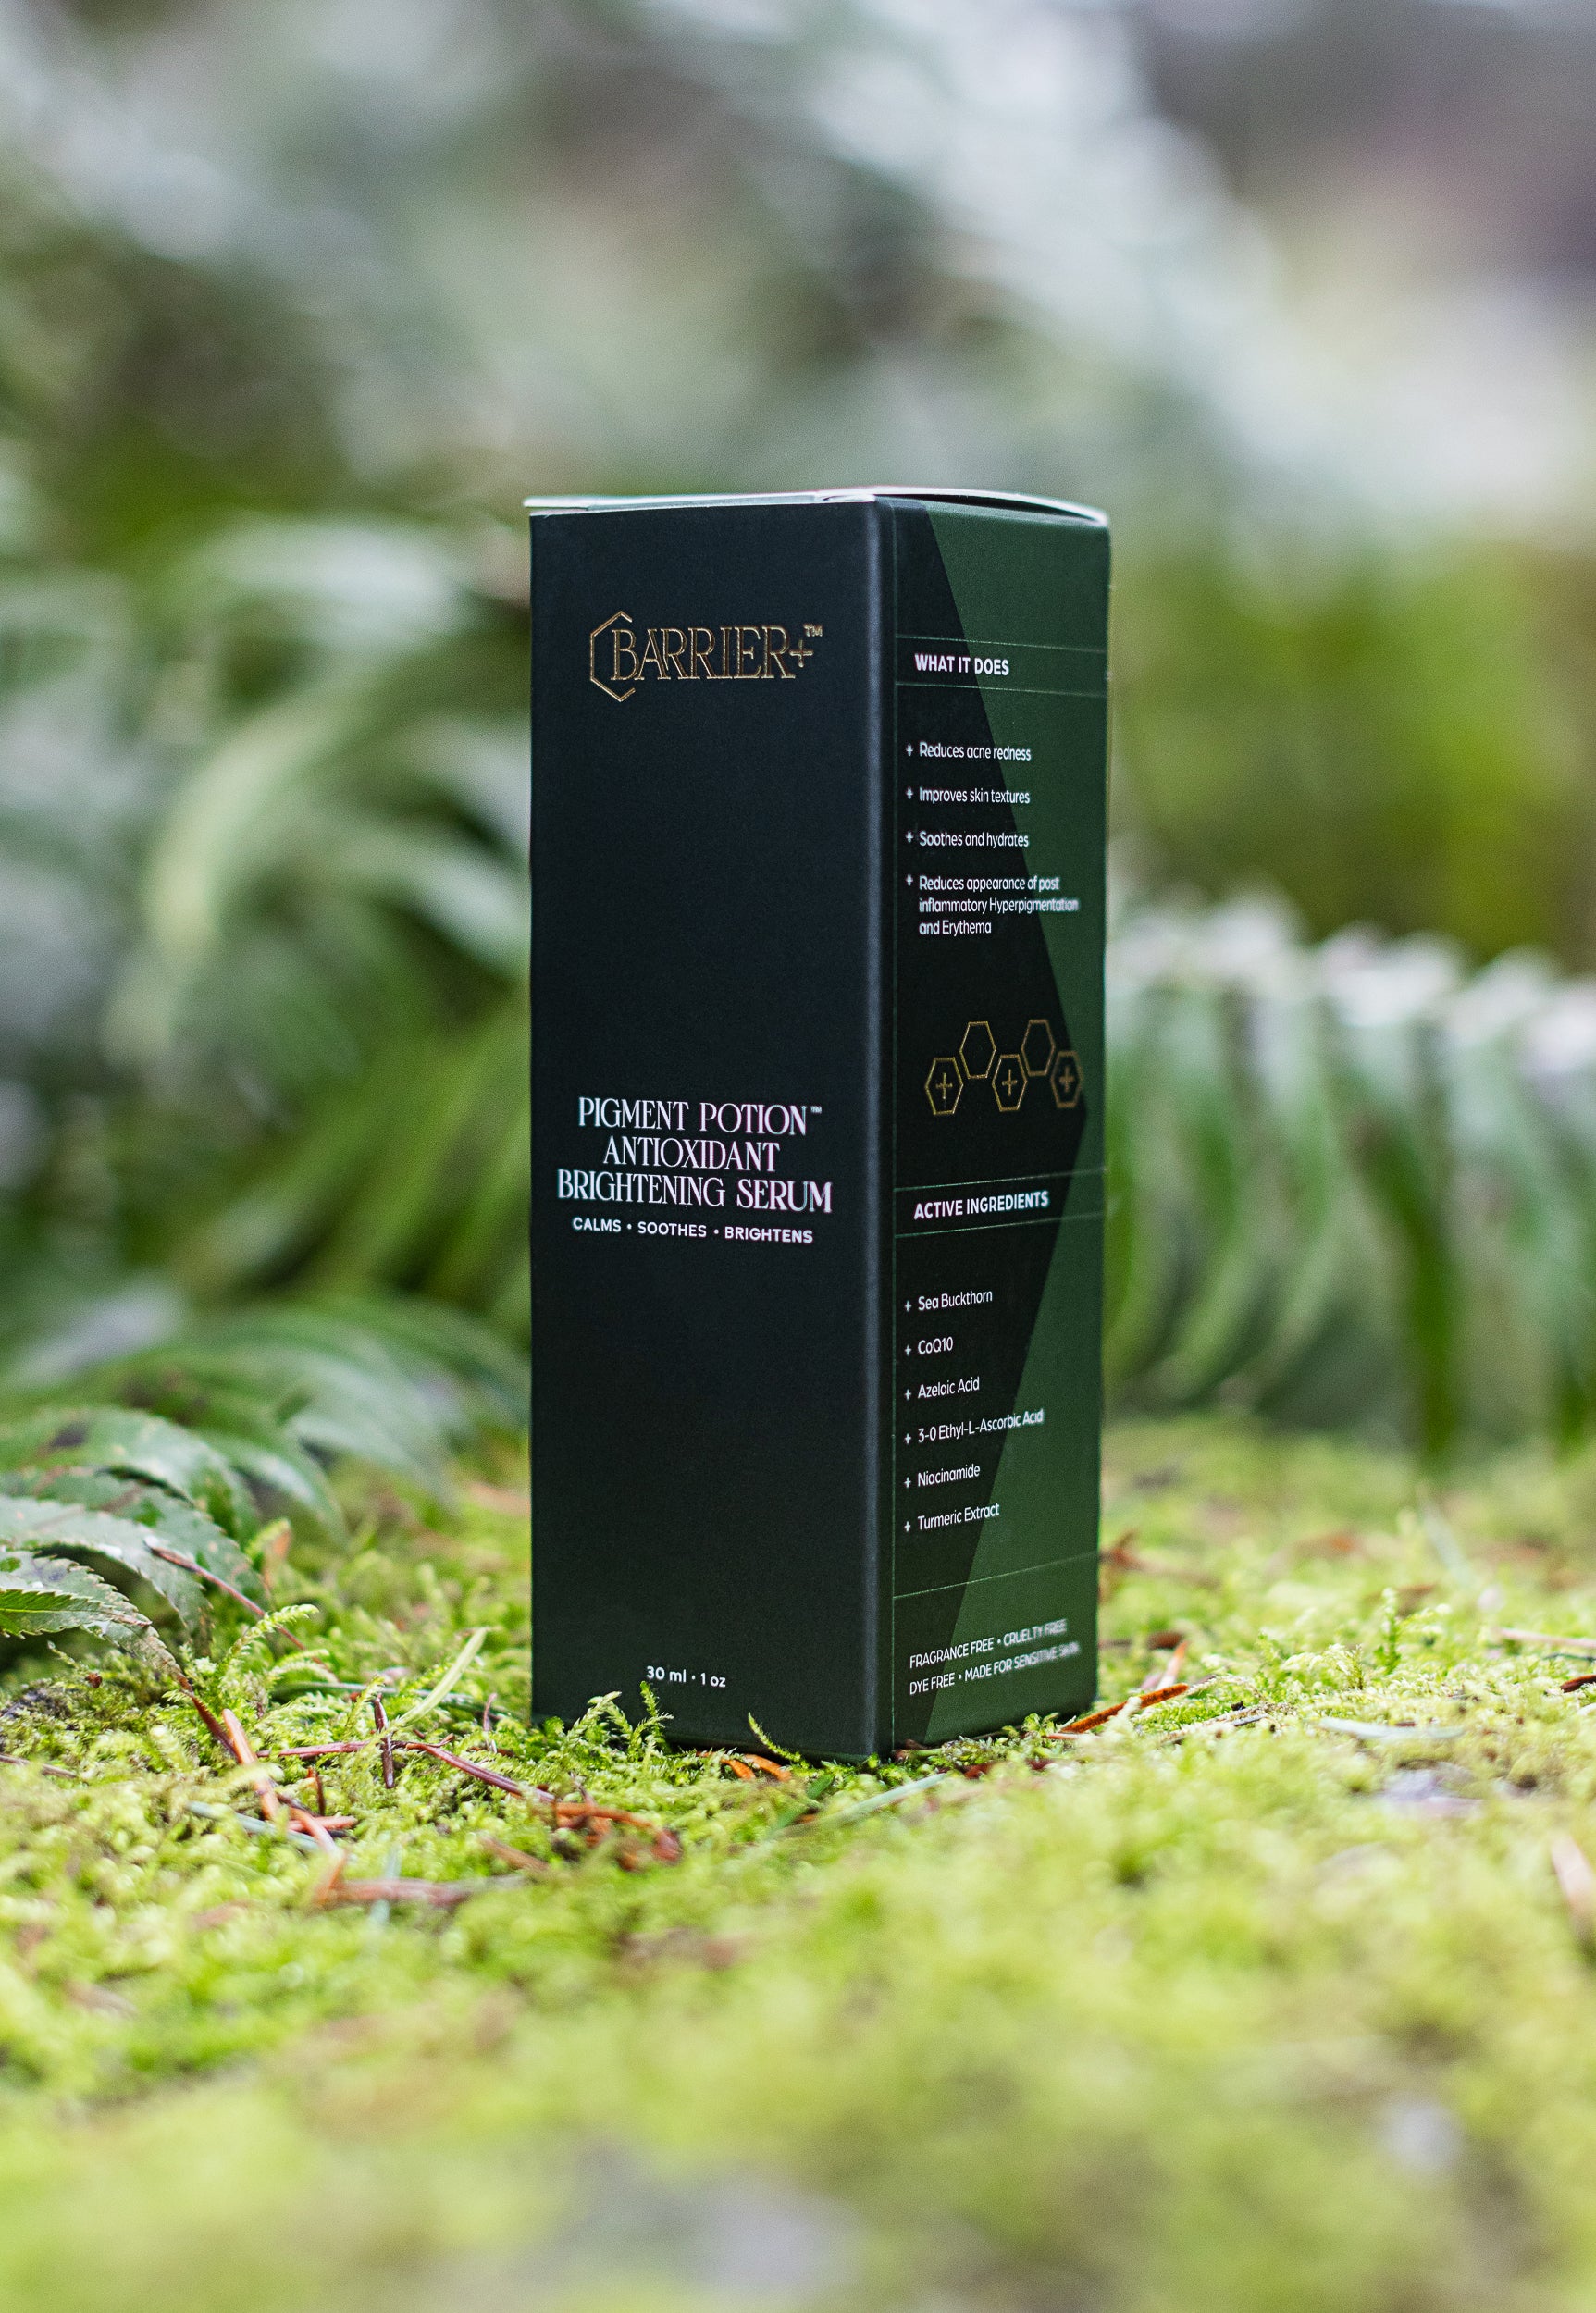 Barrier Plus Pigment Potion packaging on mossy green surface